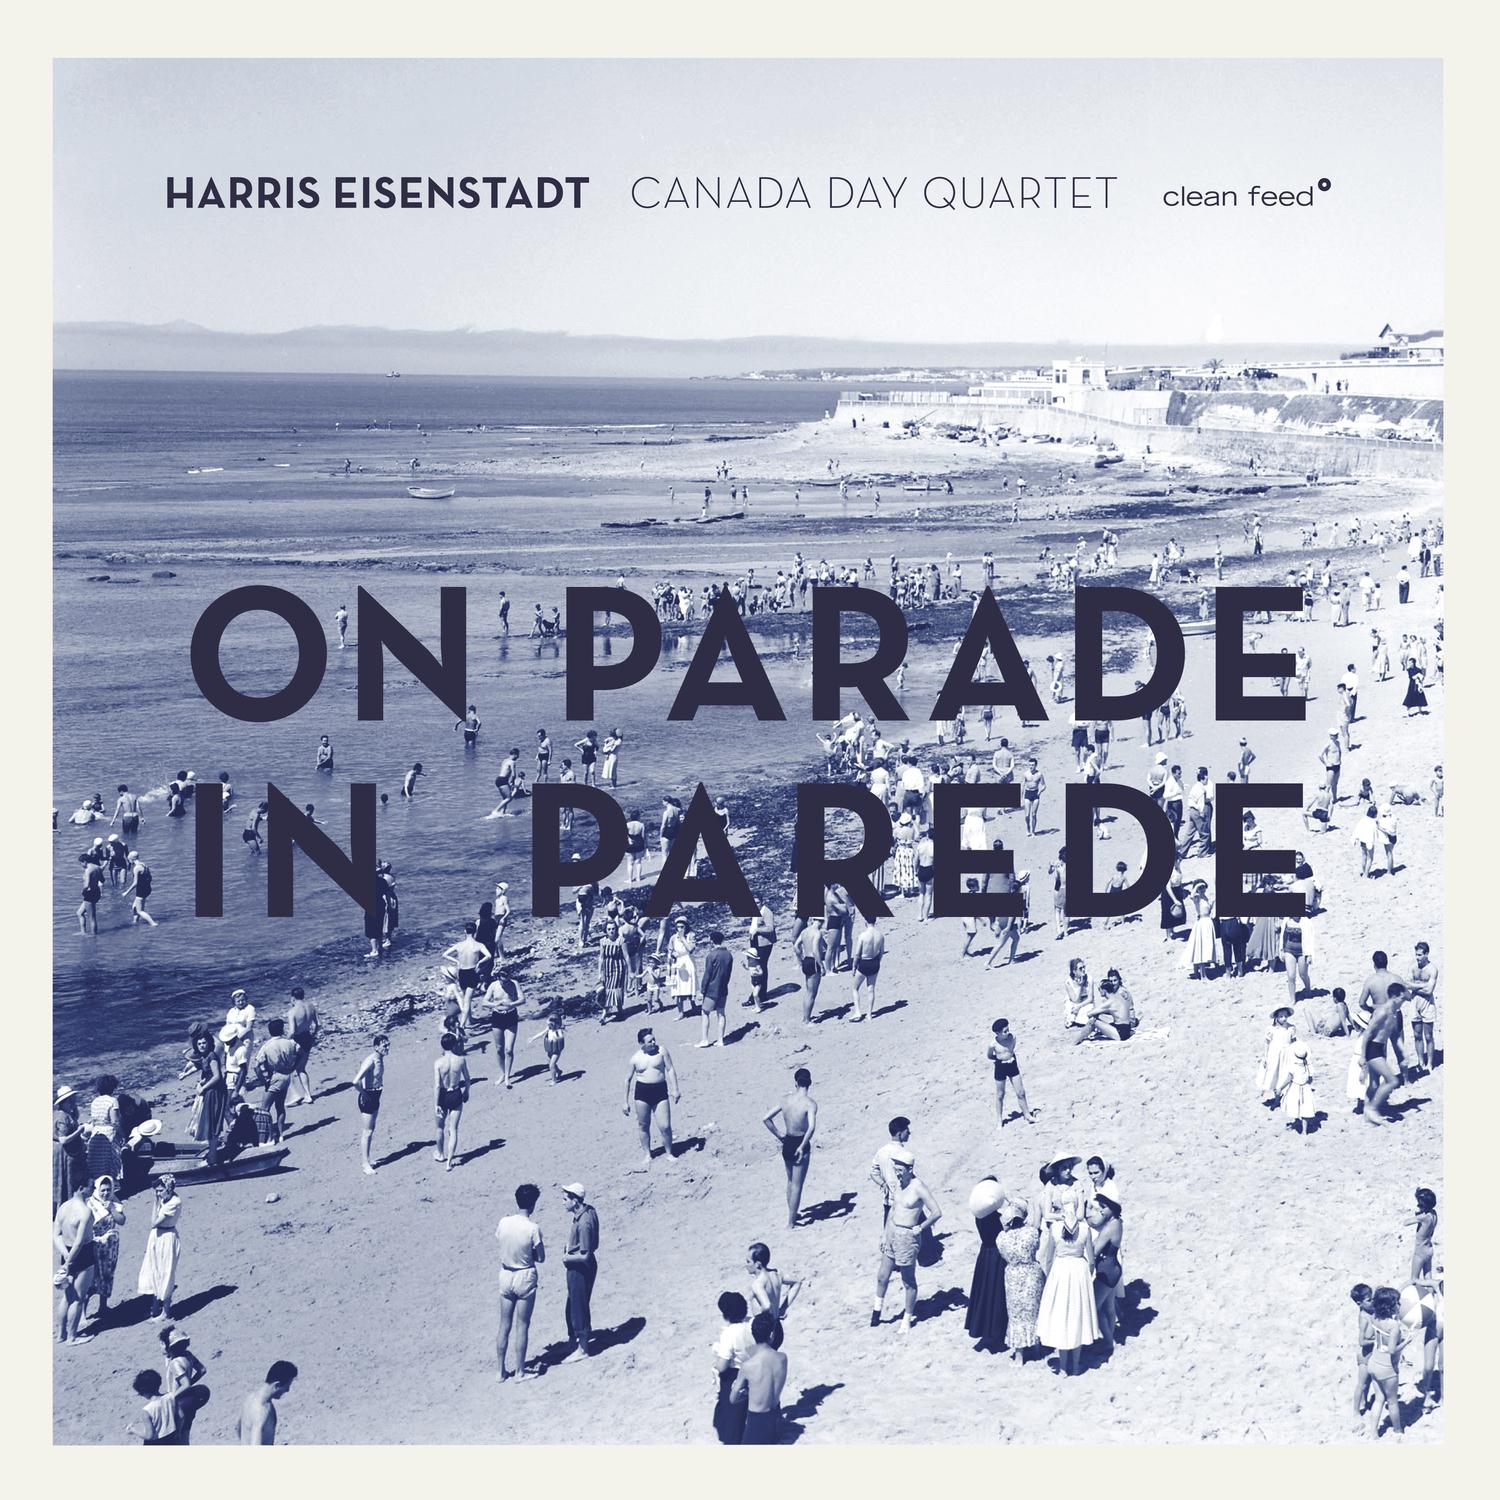 Harris Eisenstadt Canada Day Quartet - Sometimes You Gotta Ask for What You Want